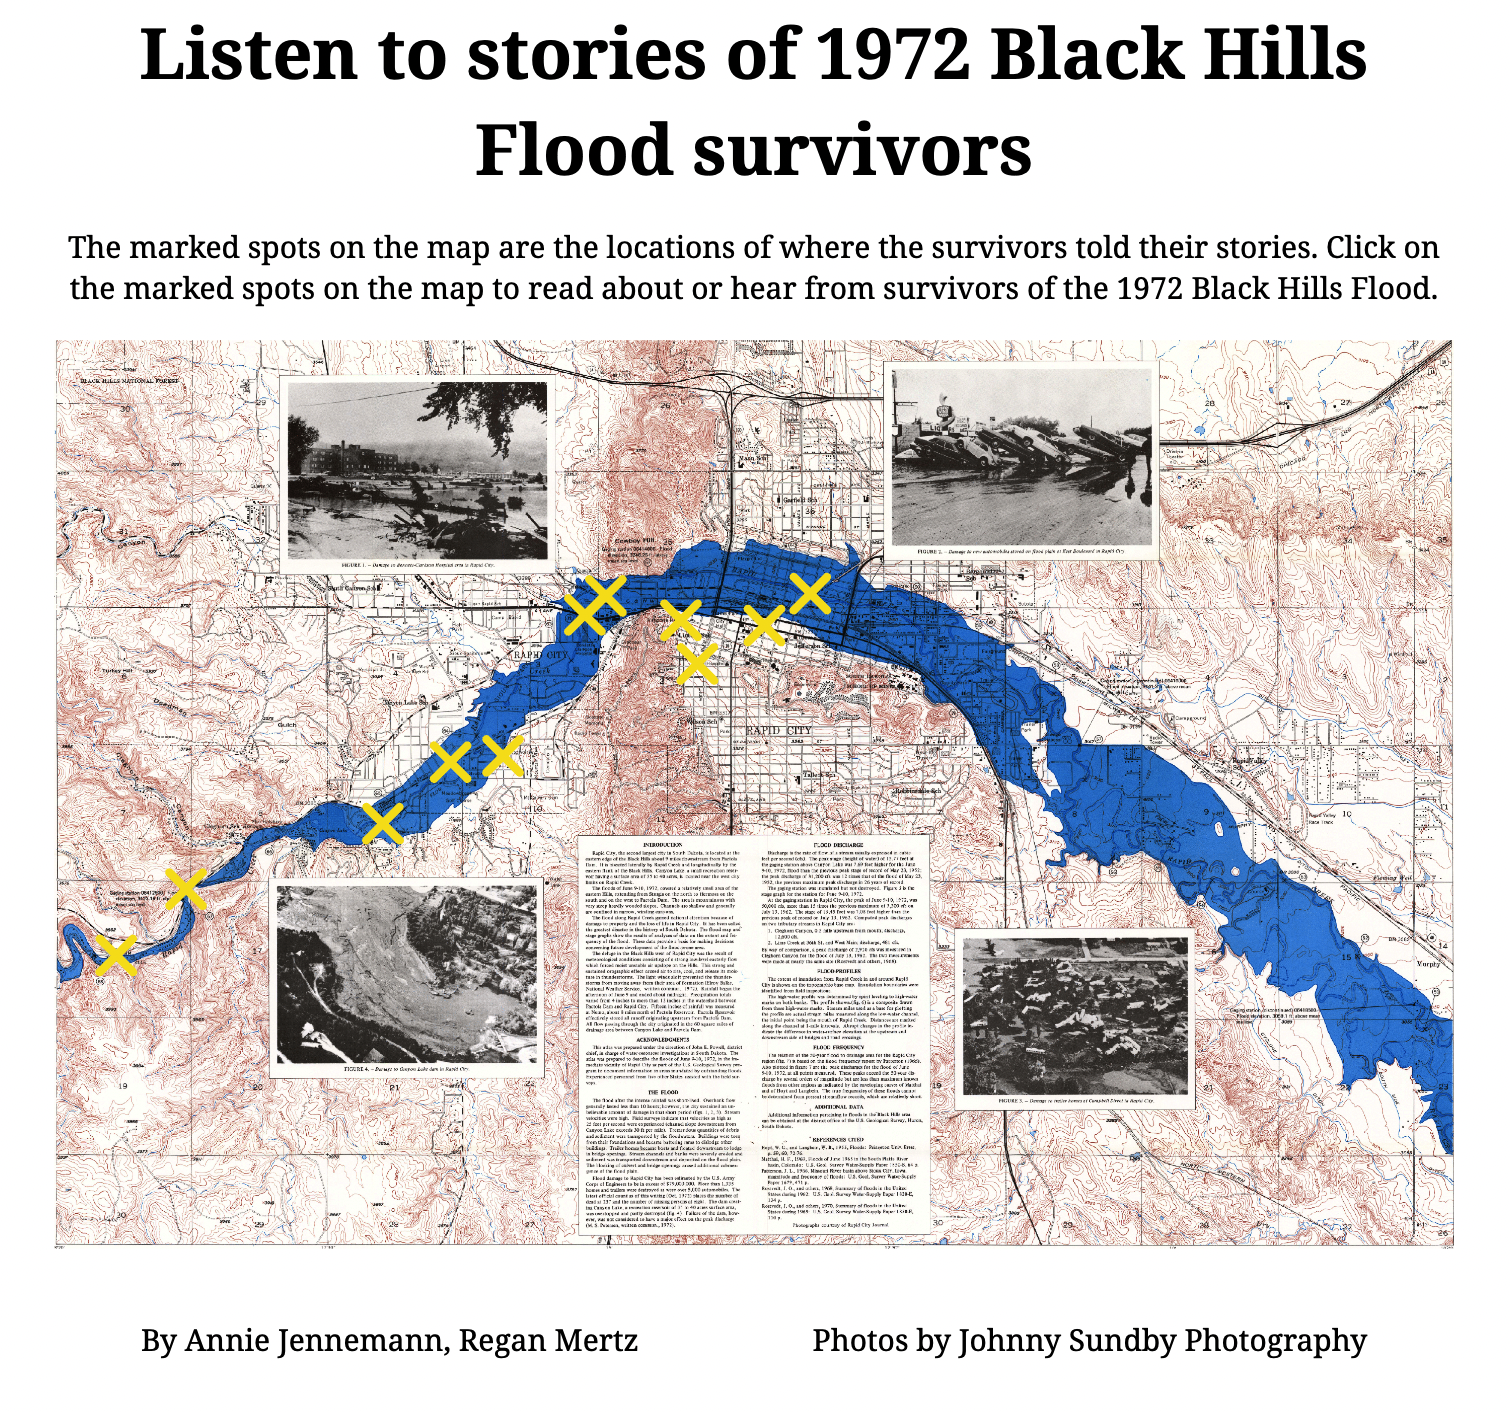 A screenshot of the interactive map commemorating flood survivors includes a headline that says, “Listen to stories of 1972 Black Hills Flood survivors,” an intro that says, “The marked spots on the map are the locations of where the survivors told their stories. Click on the marked spots on the map to read about or hear from survivors of the 1972 Black Hills Flood.” Finally, credits include Annie Jennemann, Regan Mertz and photos by Johnny Sundby Photography.